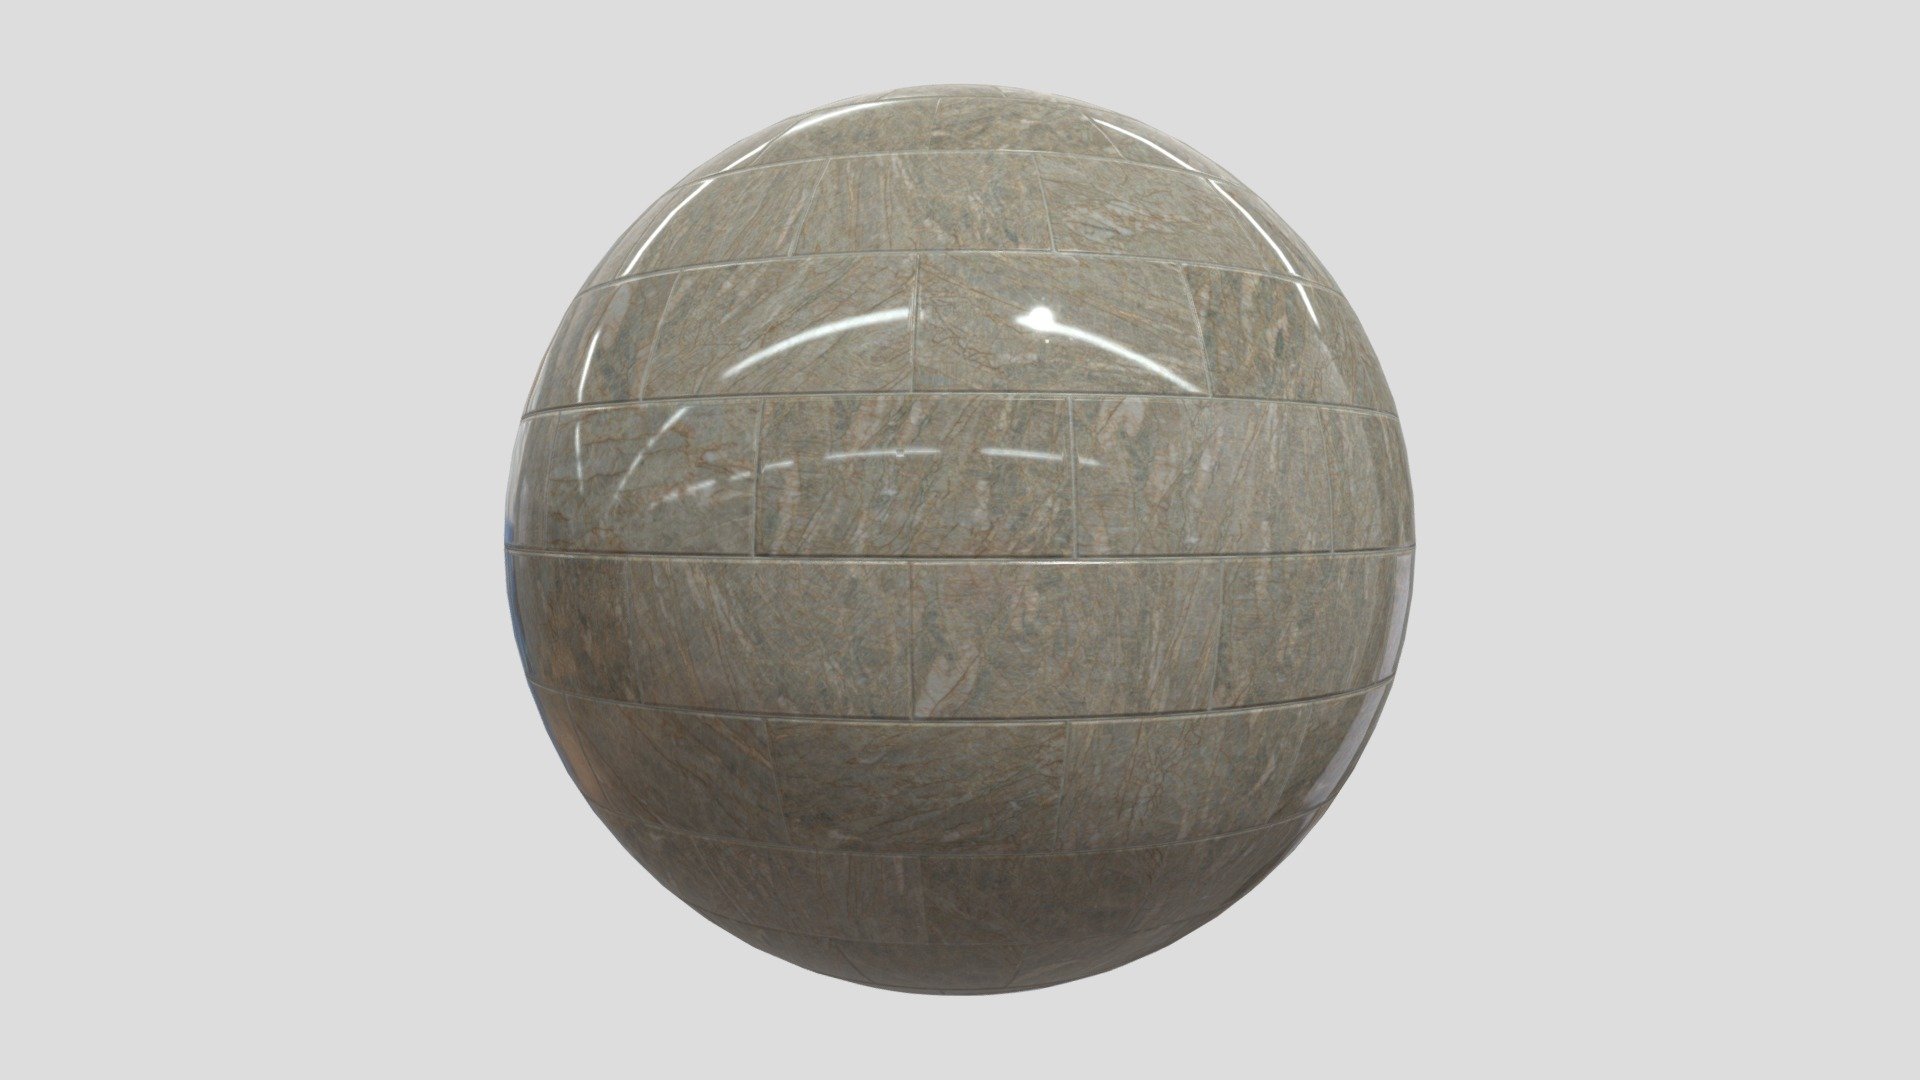 *Features:



PBR Both Standards(Metal/Rough &amp; Spec/Gloss)



4K Resolution (4096 x 4096 px)



Seamless (Tileable Both Direction)



Square Dimension



AAA Quality



Metal/Rough Types have 7 Channel Maps for each type (Base Color, AO, Metallic, Roughness, Normal, Height, Specular)



Spec/Gloss Version contains 6 Channel Maps for each type (Diffuse, Glossiness, Height, Normal, AO, Specular)



Real-World Scale Size is 100cm x 100cm



You could use it in any 3D Application PBR Render Engine such as V-Ray &amp; Corona, Blender, Cinema 3D &amp; Game Engines



Included FBX Format with Physical Material



Best Regards

DATEC Studio - Tile 004 Ciello Granite V22 - Buy Royalty Free 3D model by DATEC_Studio 3d model